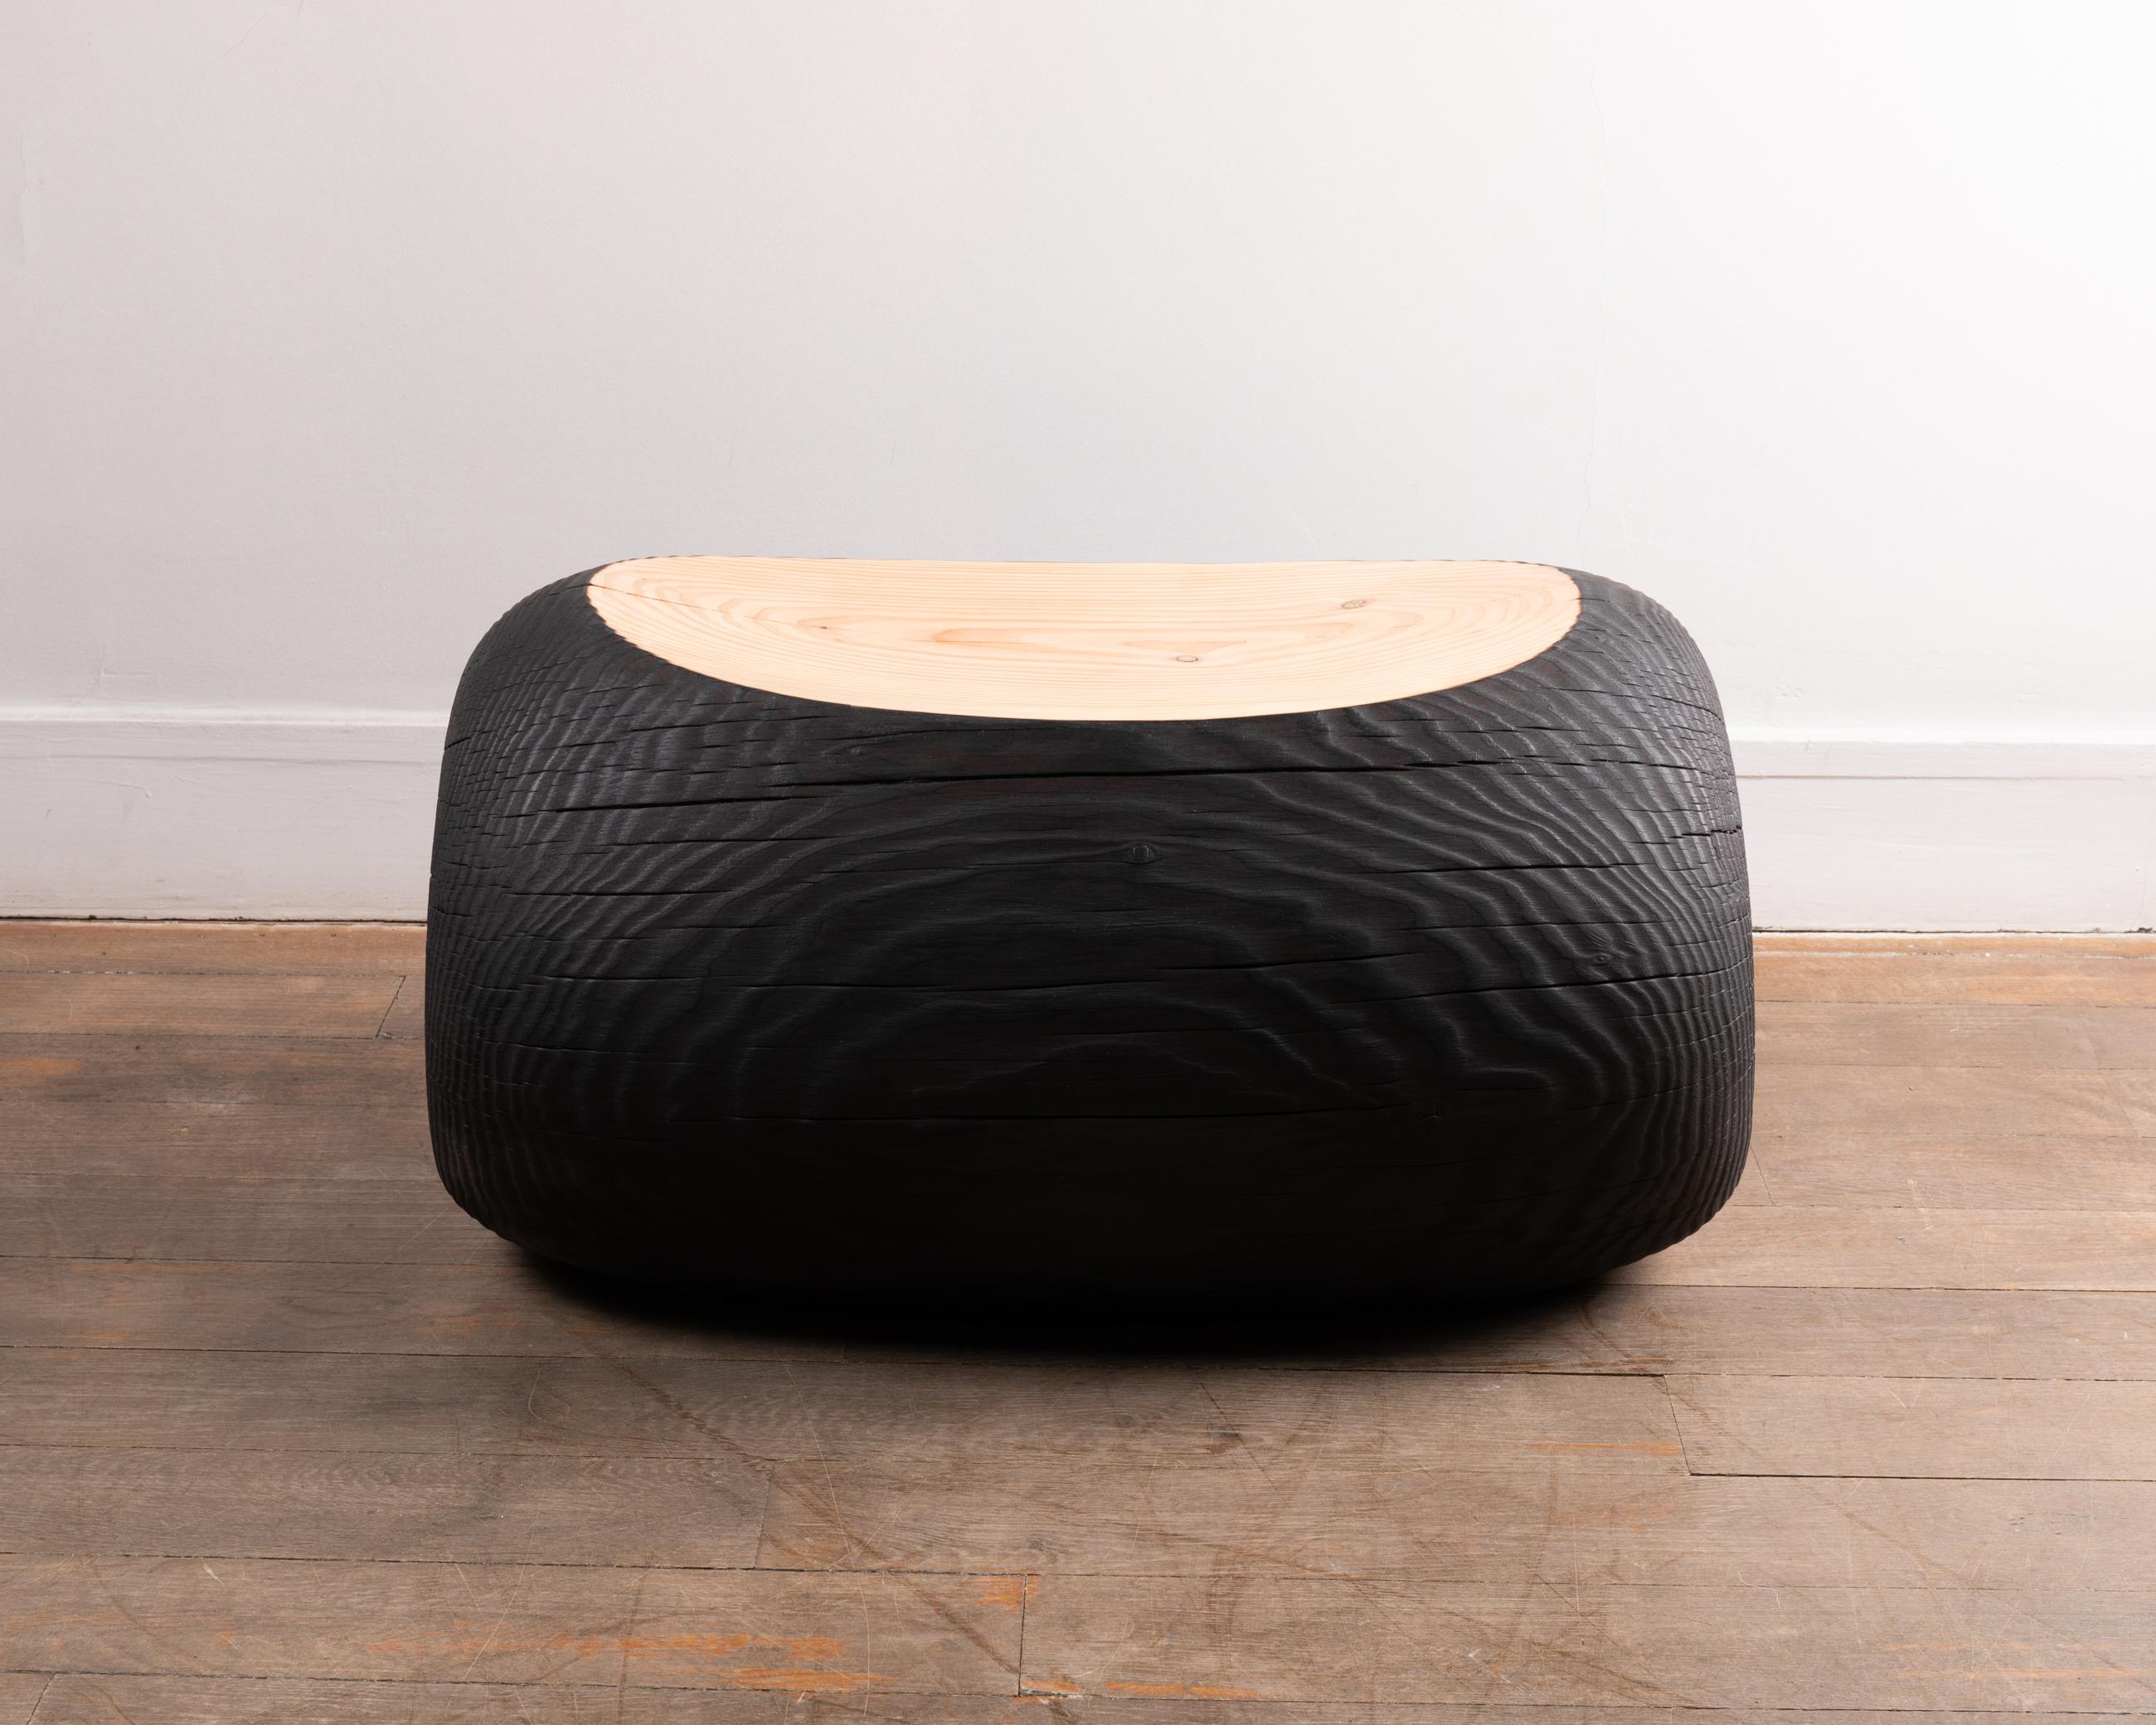 A burnt wood bench made of Douglas pine.
The wood of the excavated trunk is burned in contrast with the seat, which shows the natural light color and grain of the wood.
Organic modern style. 
Contemporary production by François